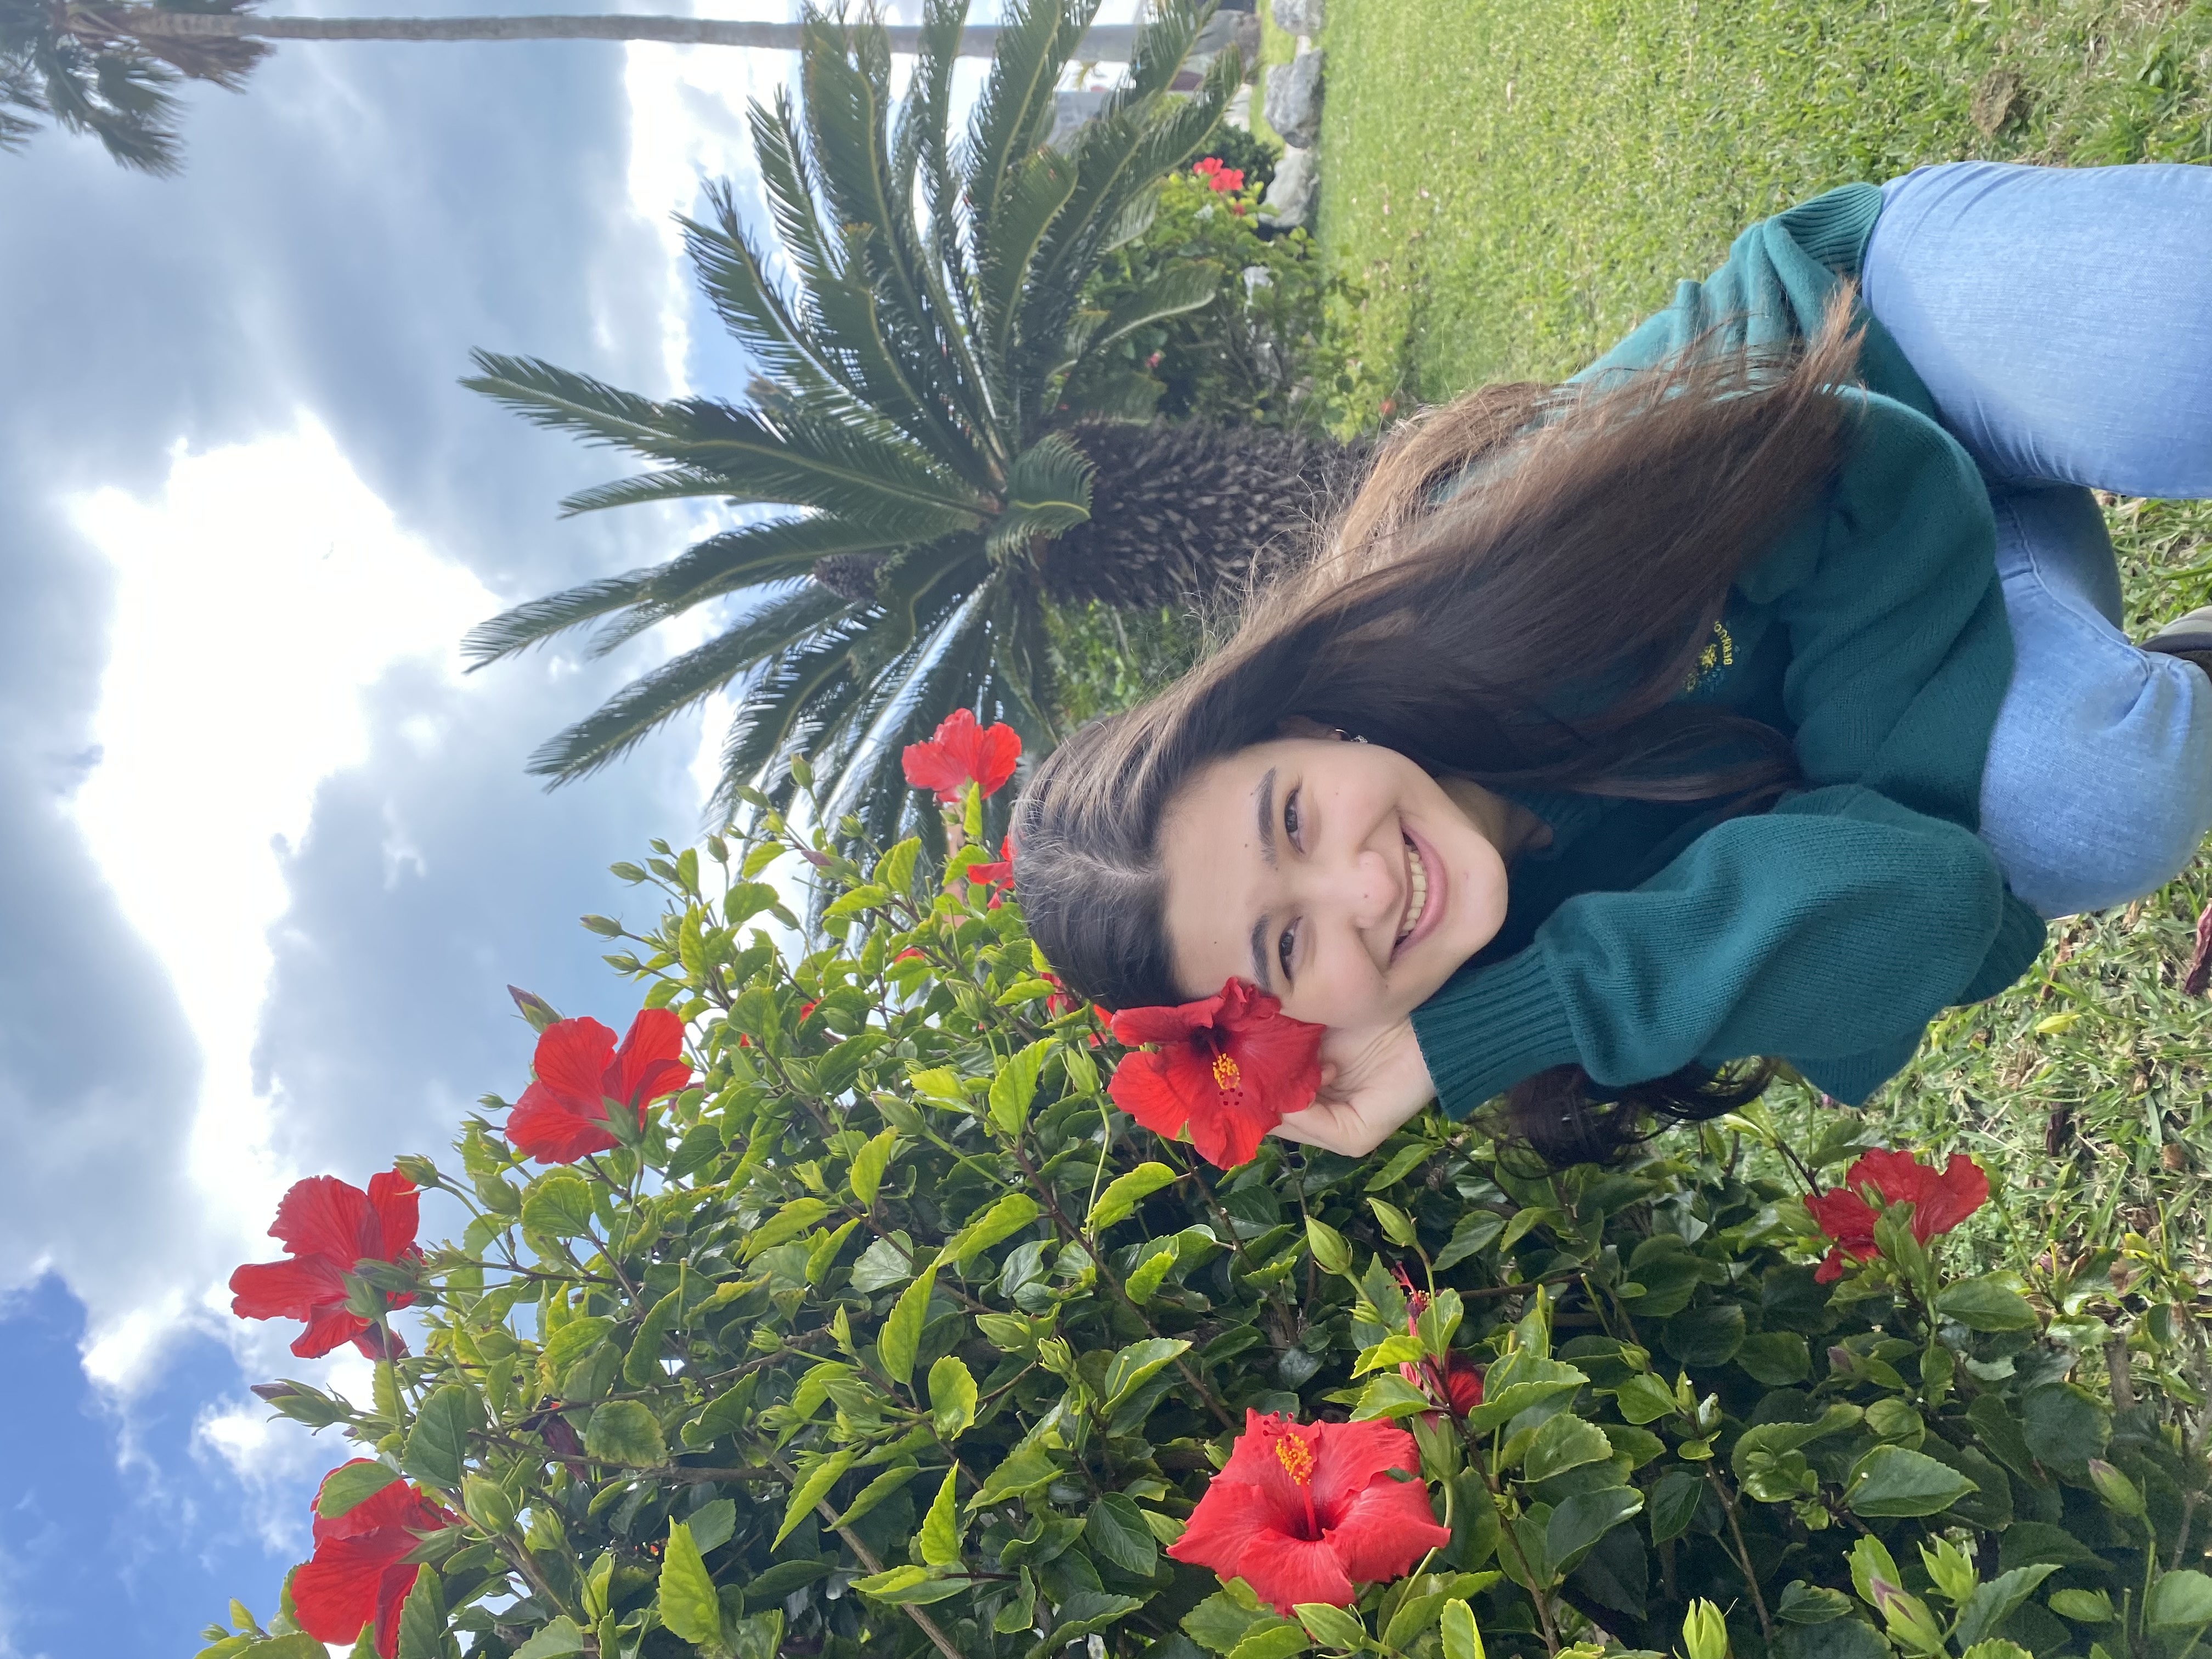 Sarah has dark brown hair and a bright smile. She kneels in front of a hibiscus bush as if putting one of the flowers in her hair, wearing a sweatshirt and jeans in a sunny tropical climate.